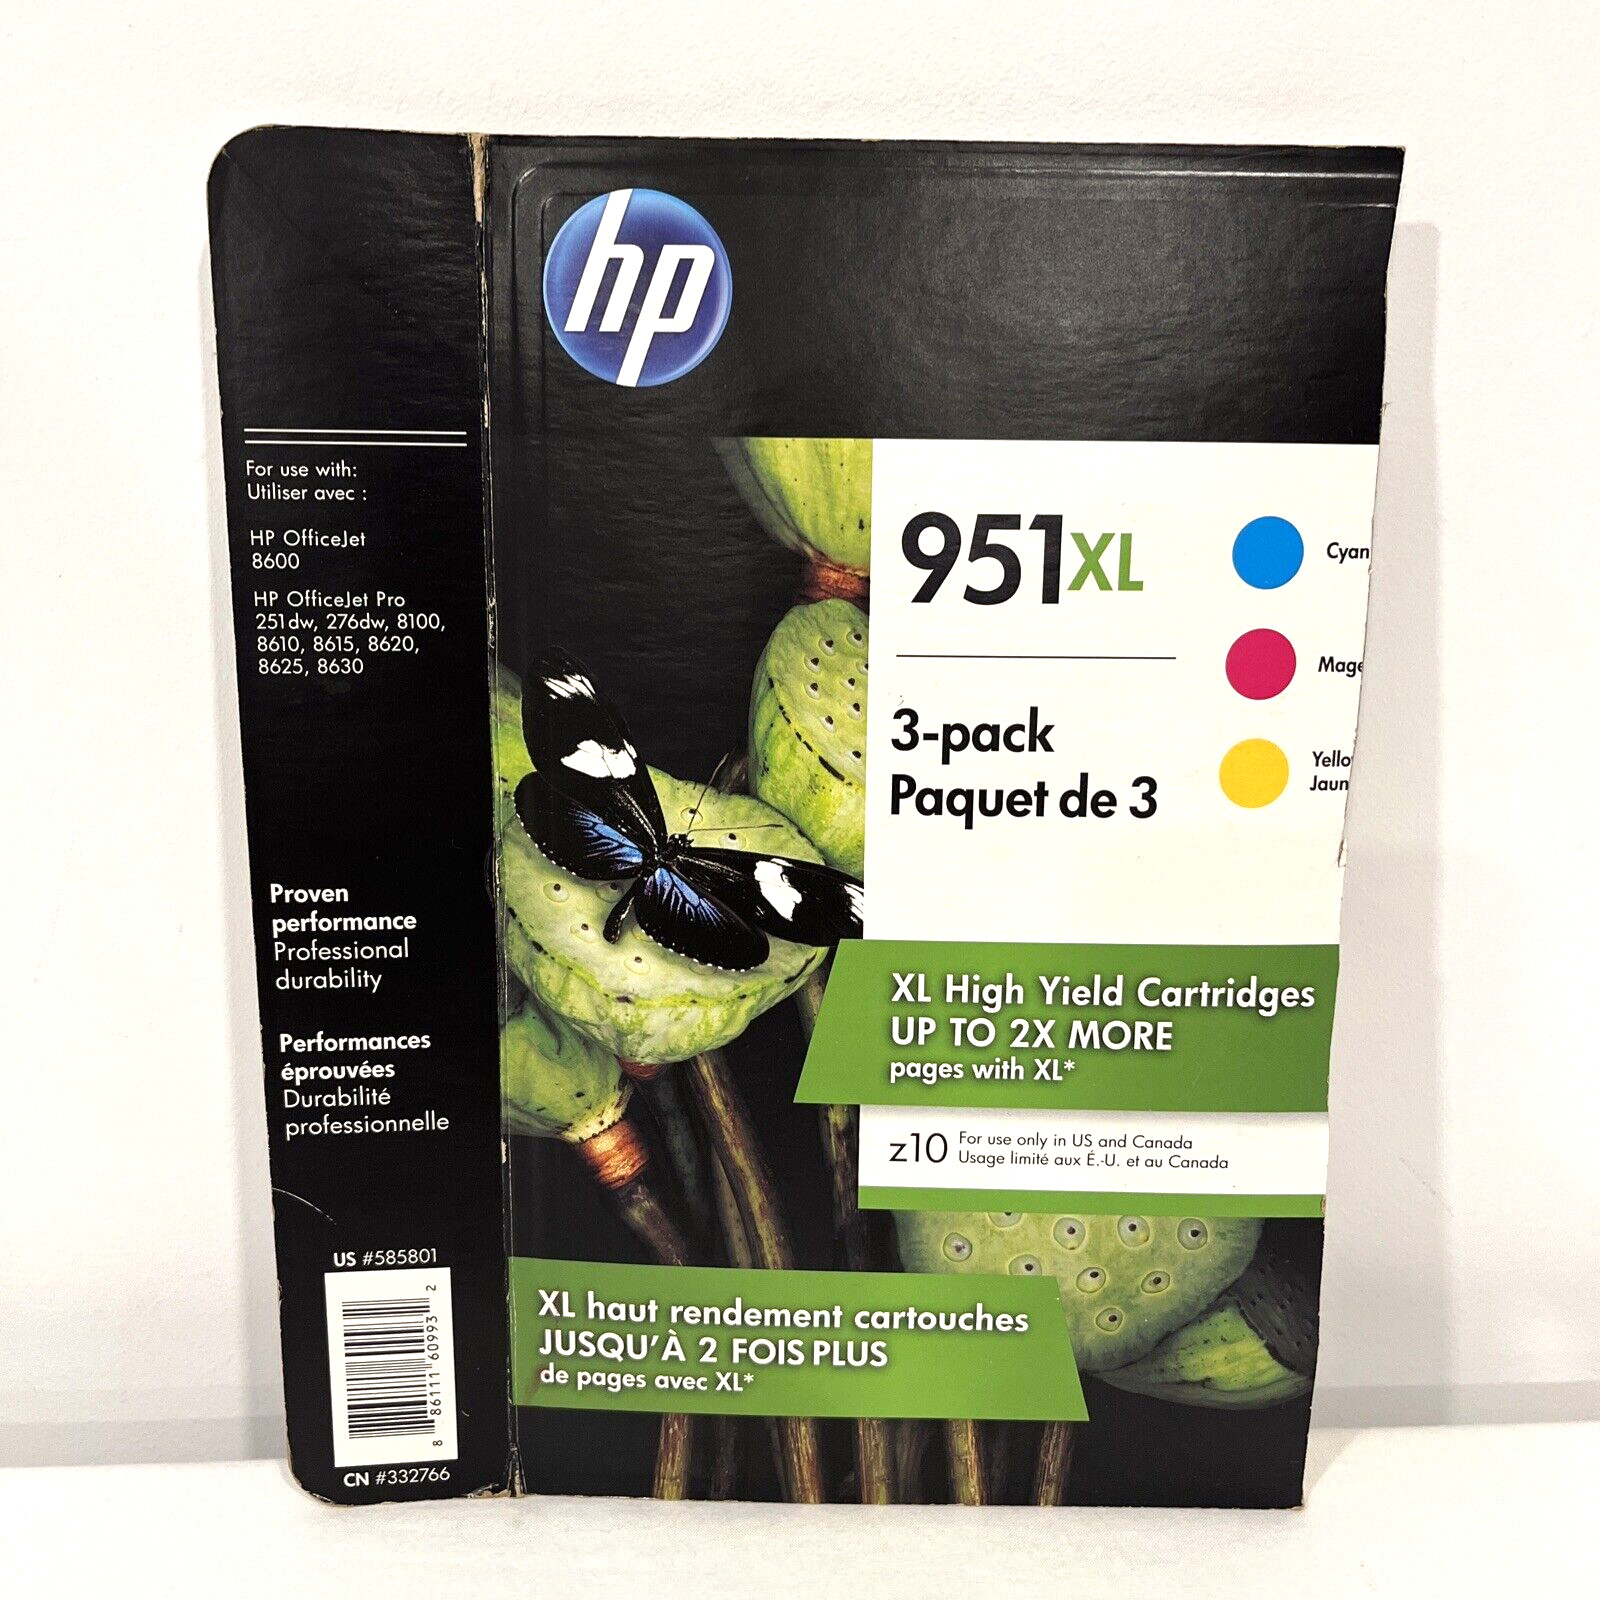 HP 951XL TRICOLOR 3-PACK INK CARTRIDGES BRAND NEW FOR OFFICEJET PRINTER MAR 2021